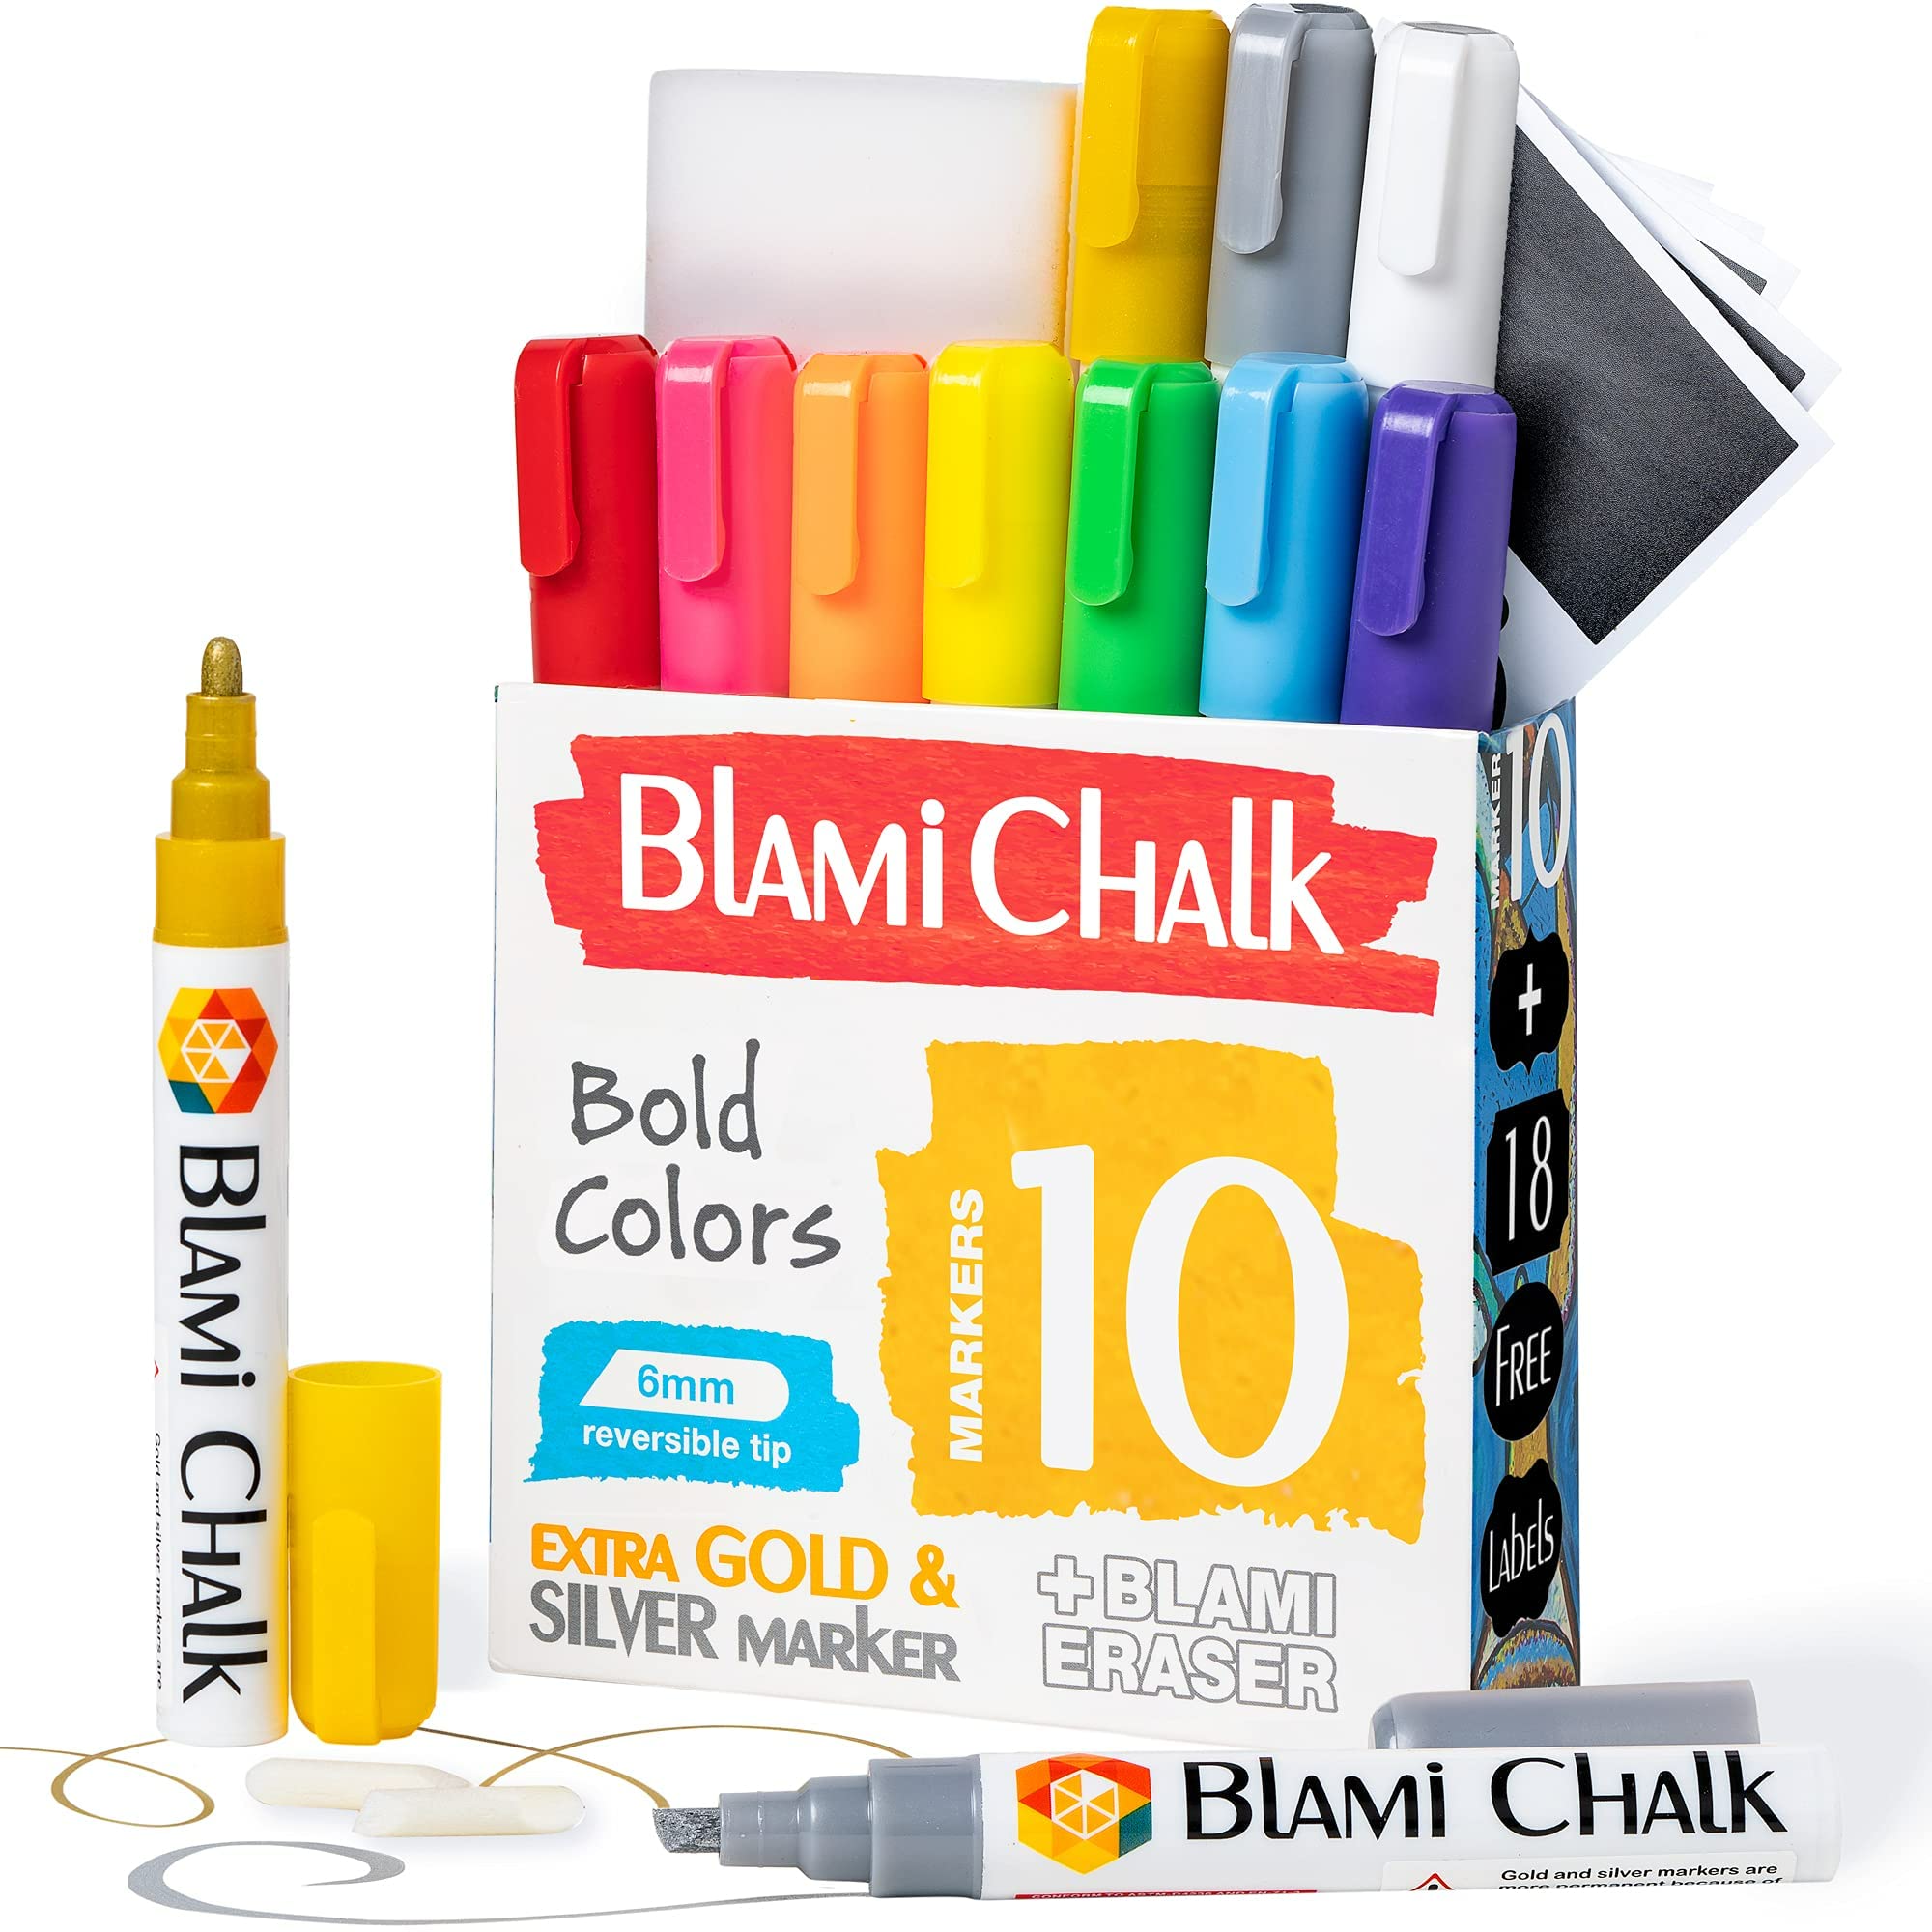 10 Pack Erasable Liquid Chalk Markers with Extra Gold and Silver Colors, 6mm Reversible Tip Chalk Pens with Vibrant Color for Chalkboard $6.99